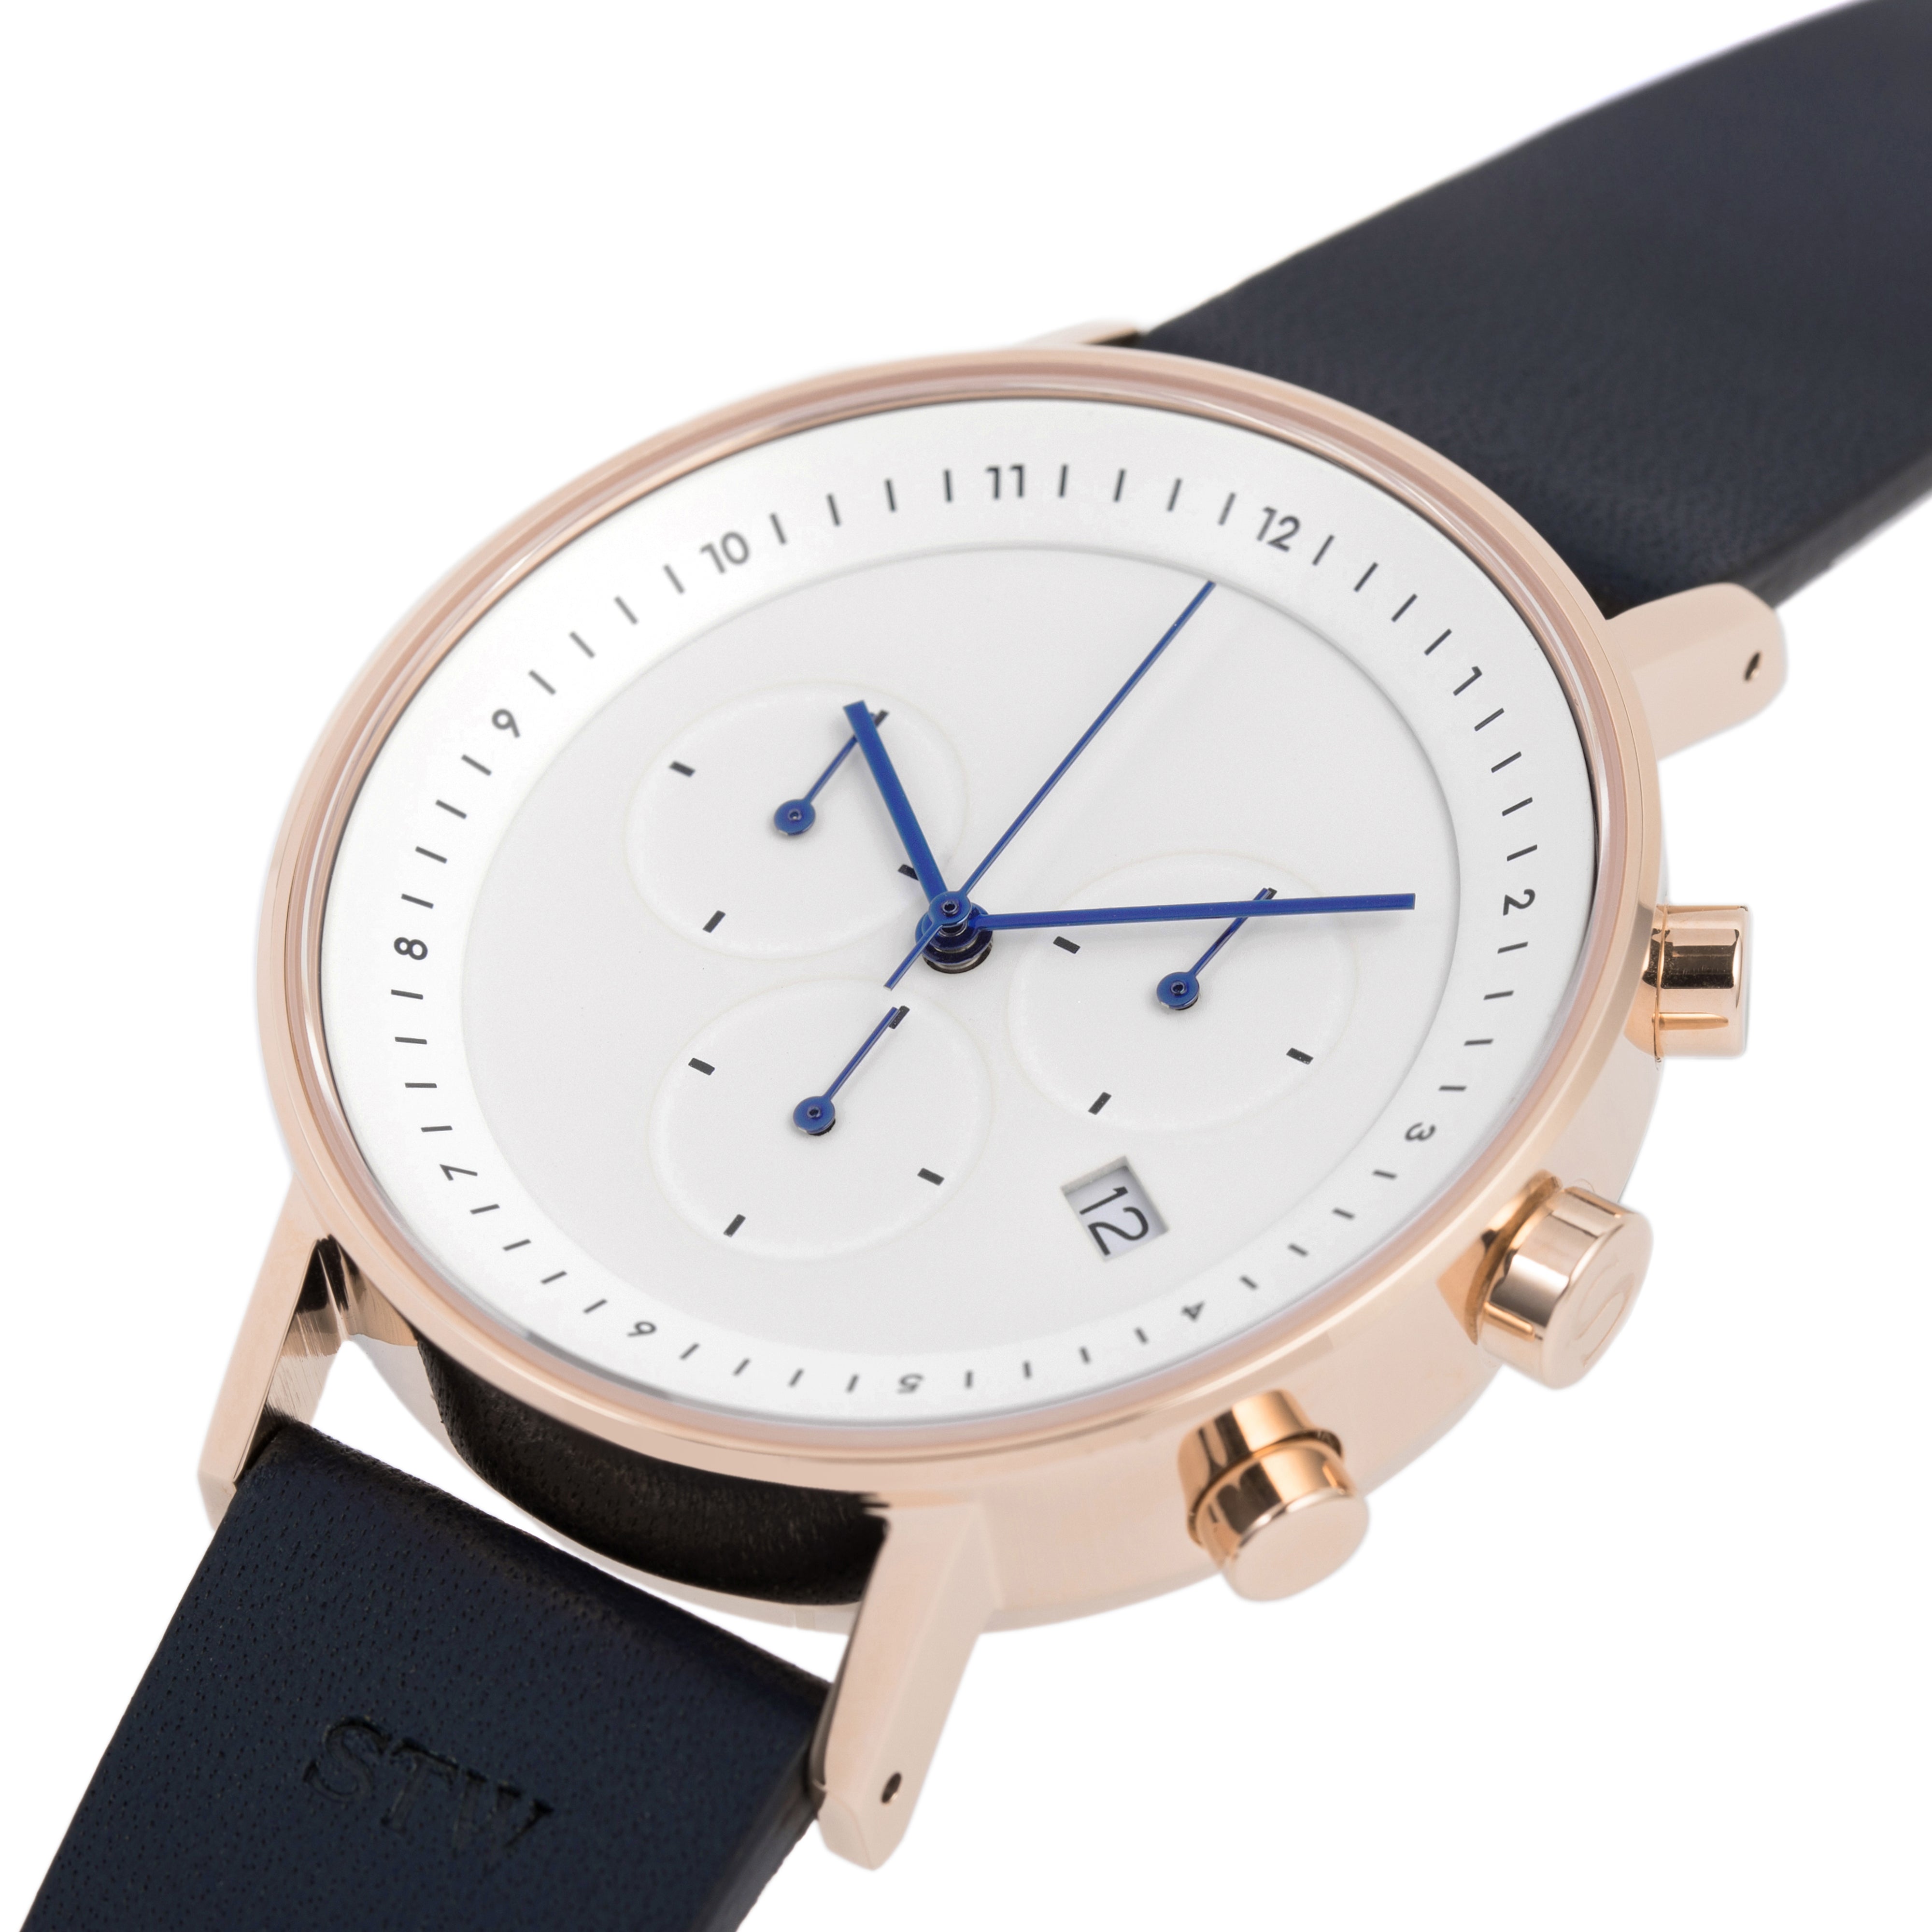 THE CHRONO -  WHITE DIAL WITH NAVY LEATHER STRAP WATCH